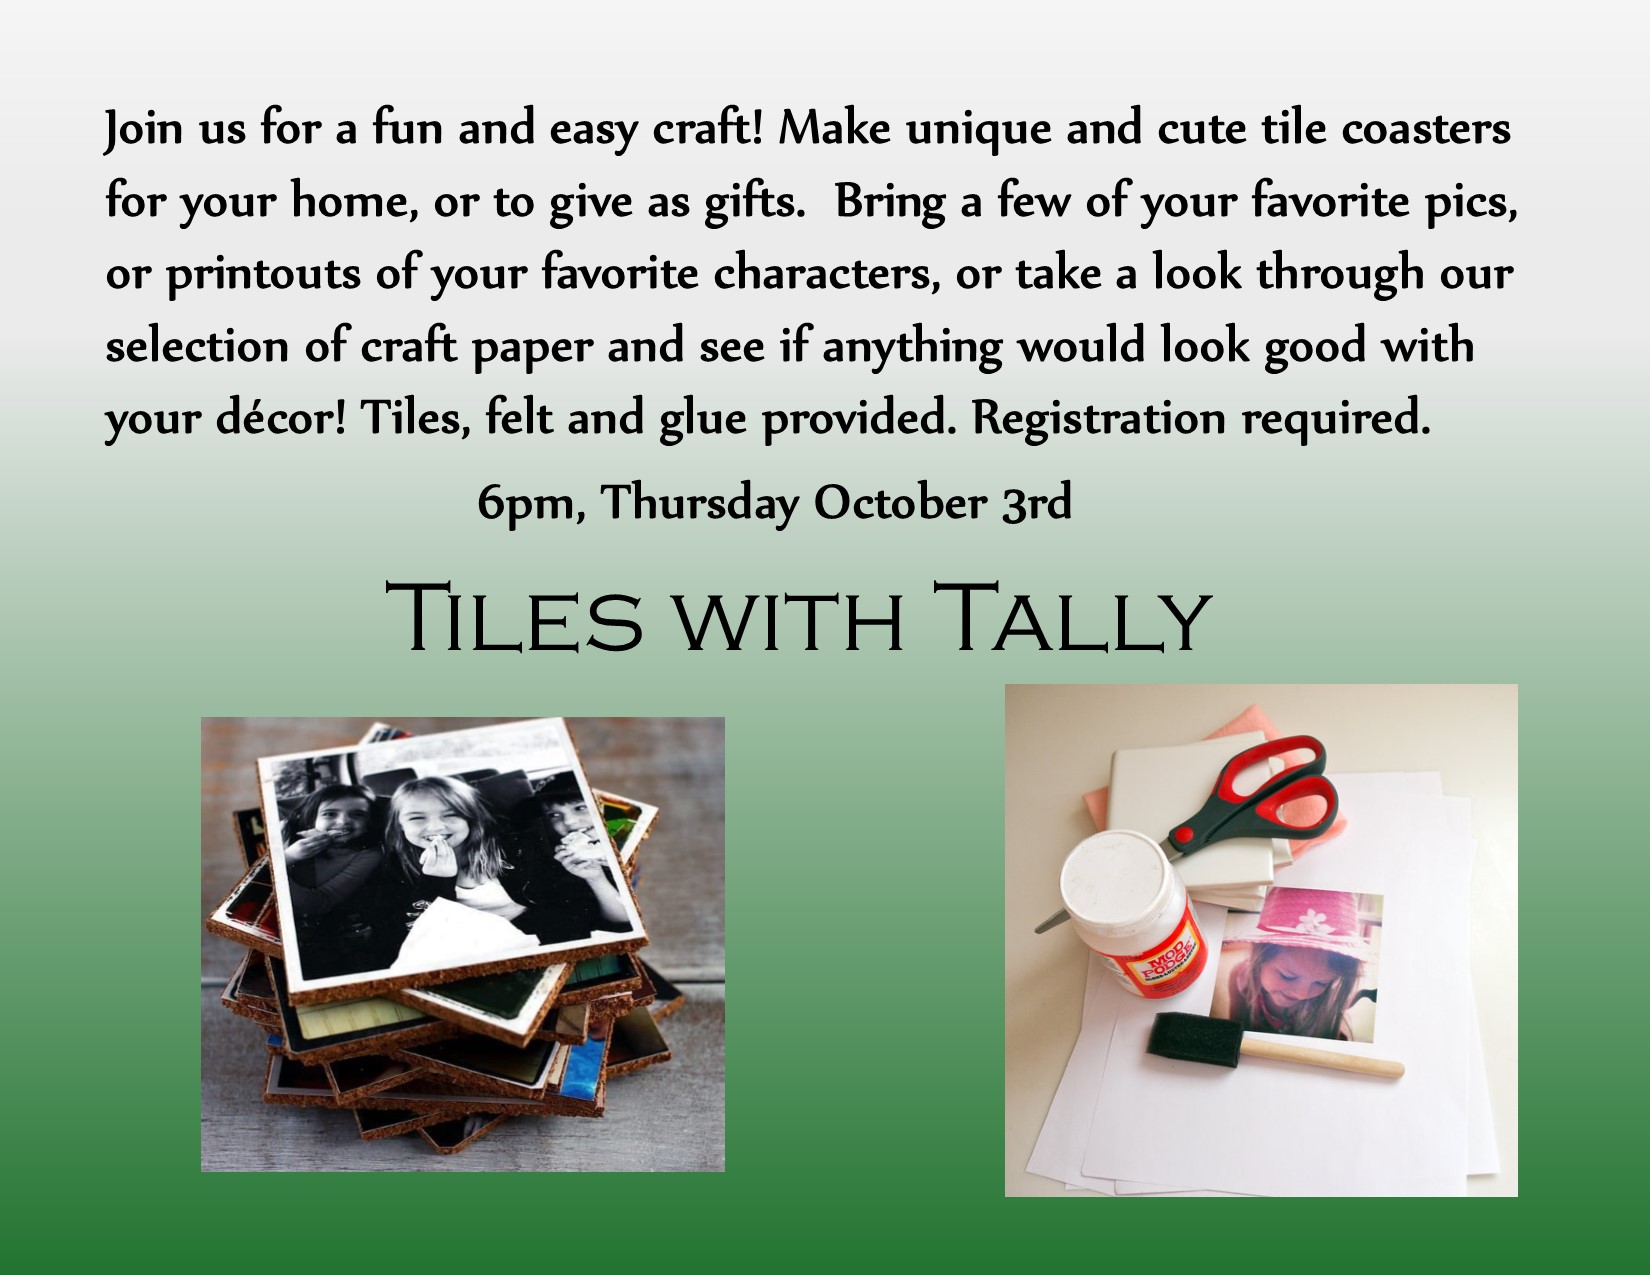 Poster promoting our upcoming craft class, Tiles with Tally, registration required.